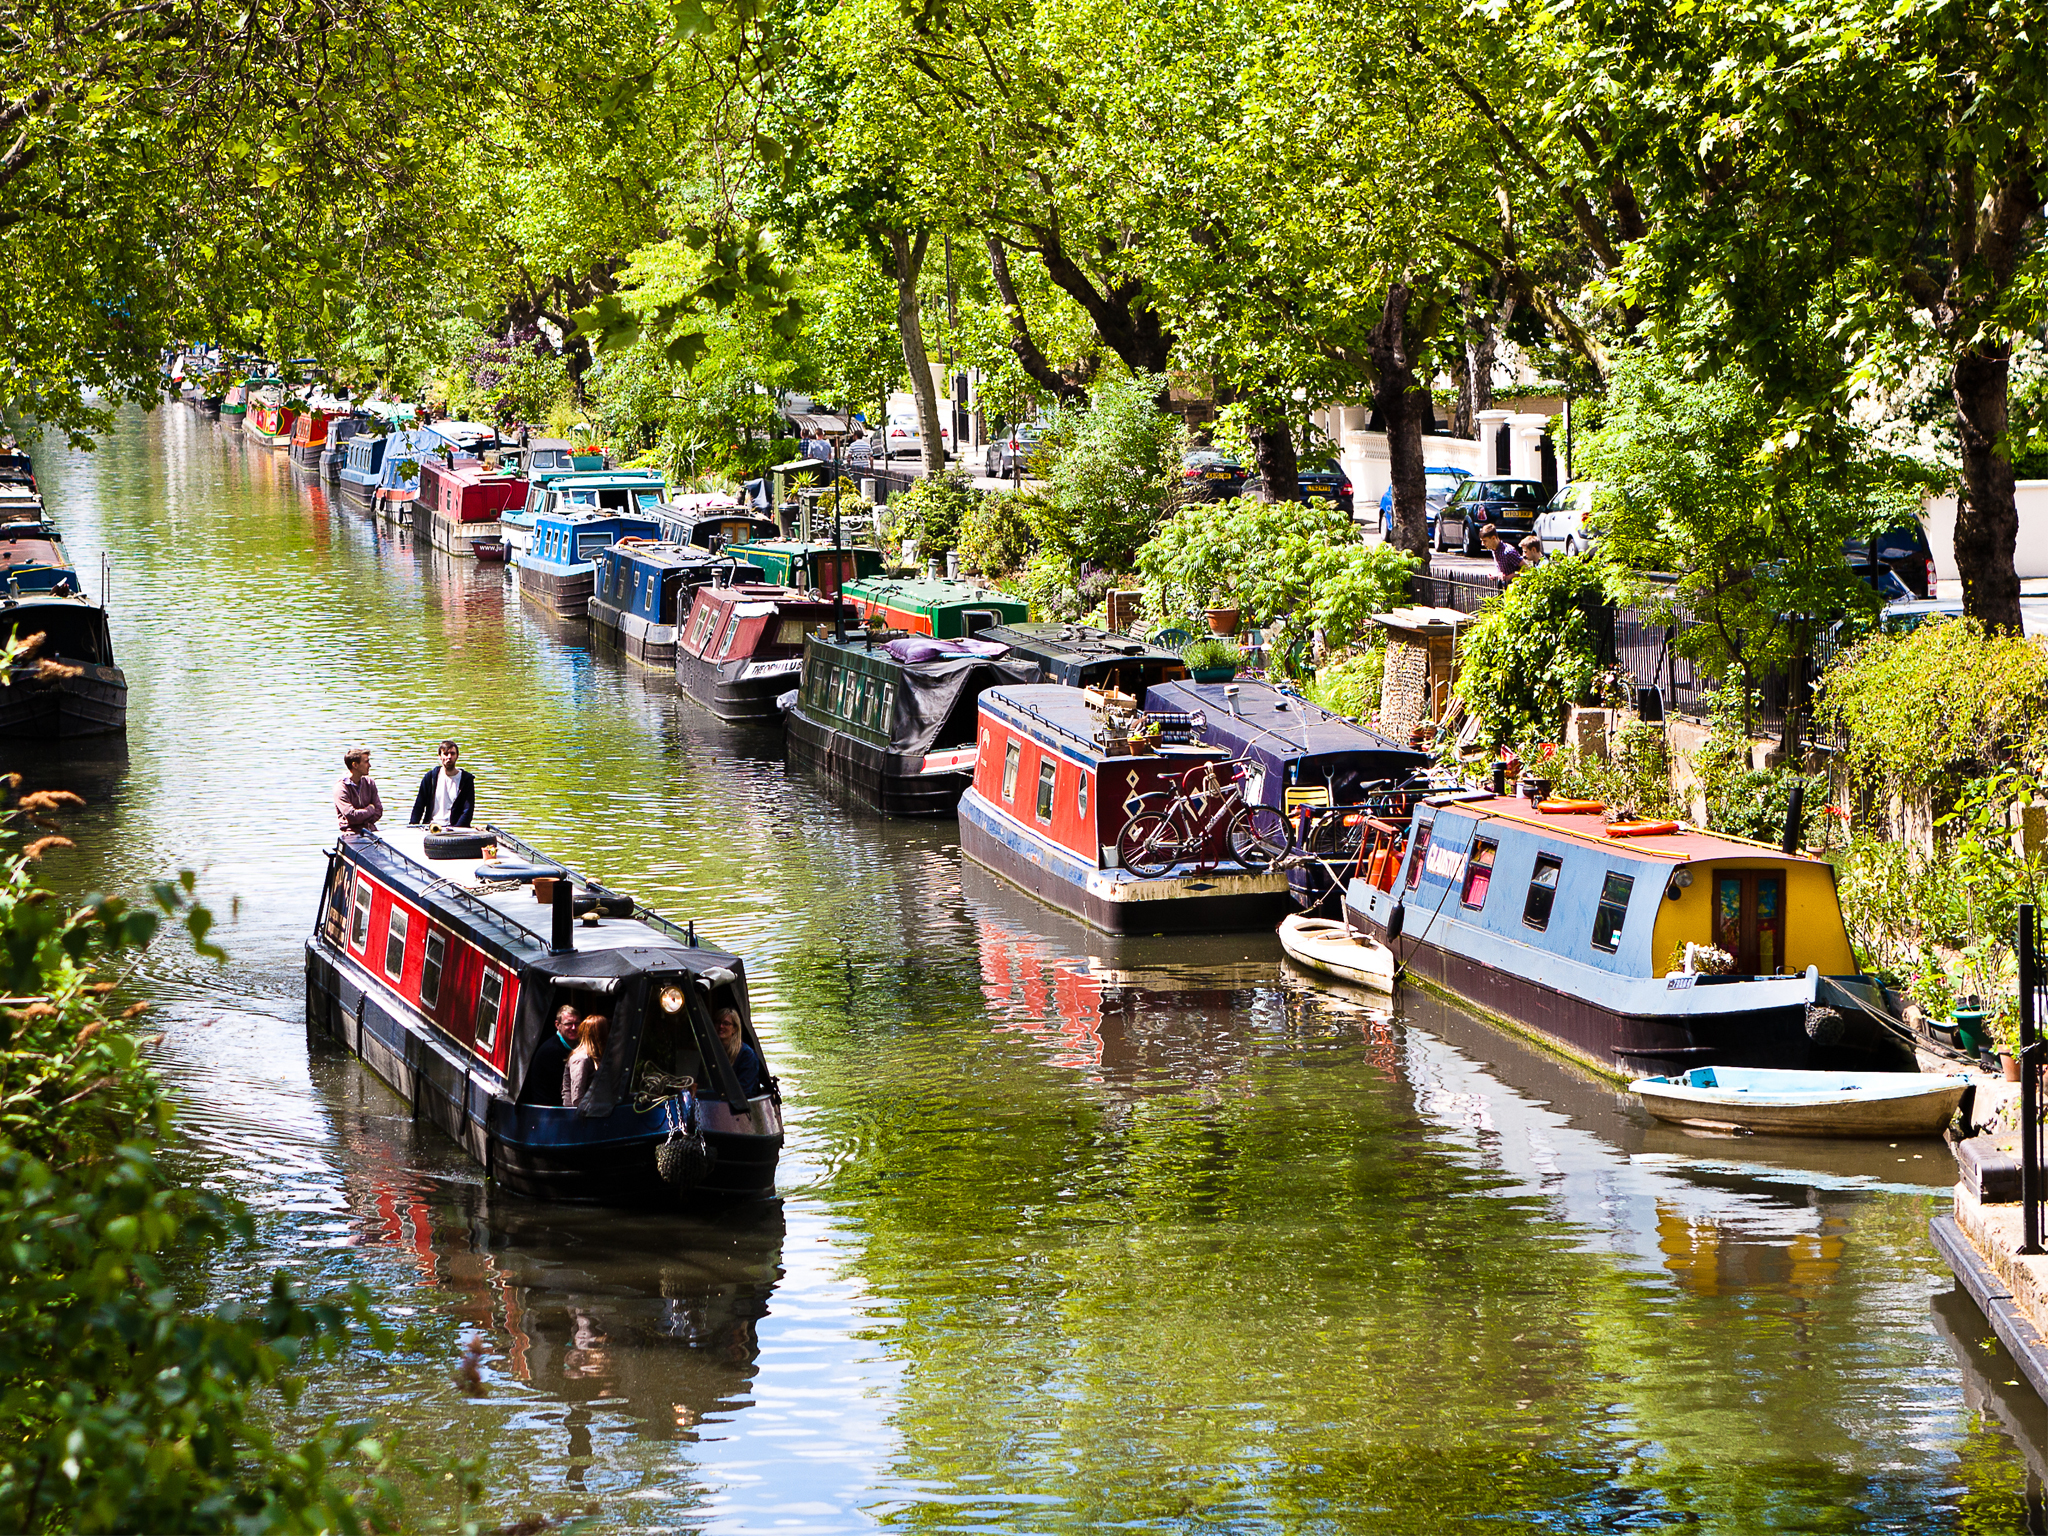 Little Venice guide – Canals, boat trips, restaurants, bars, pubs and